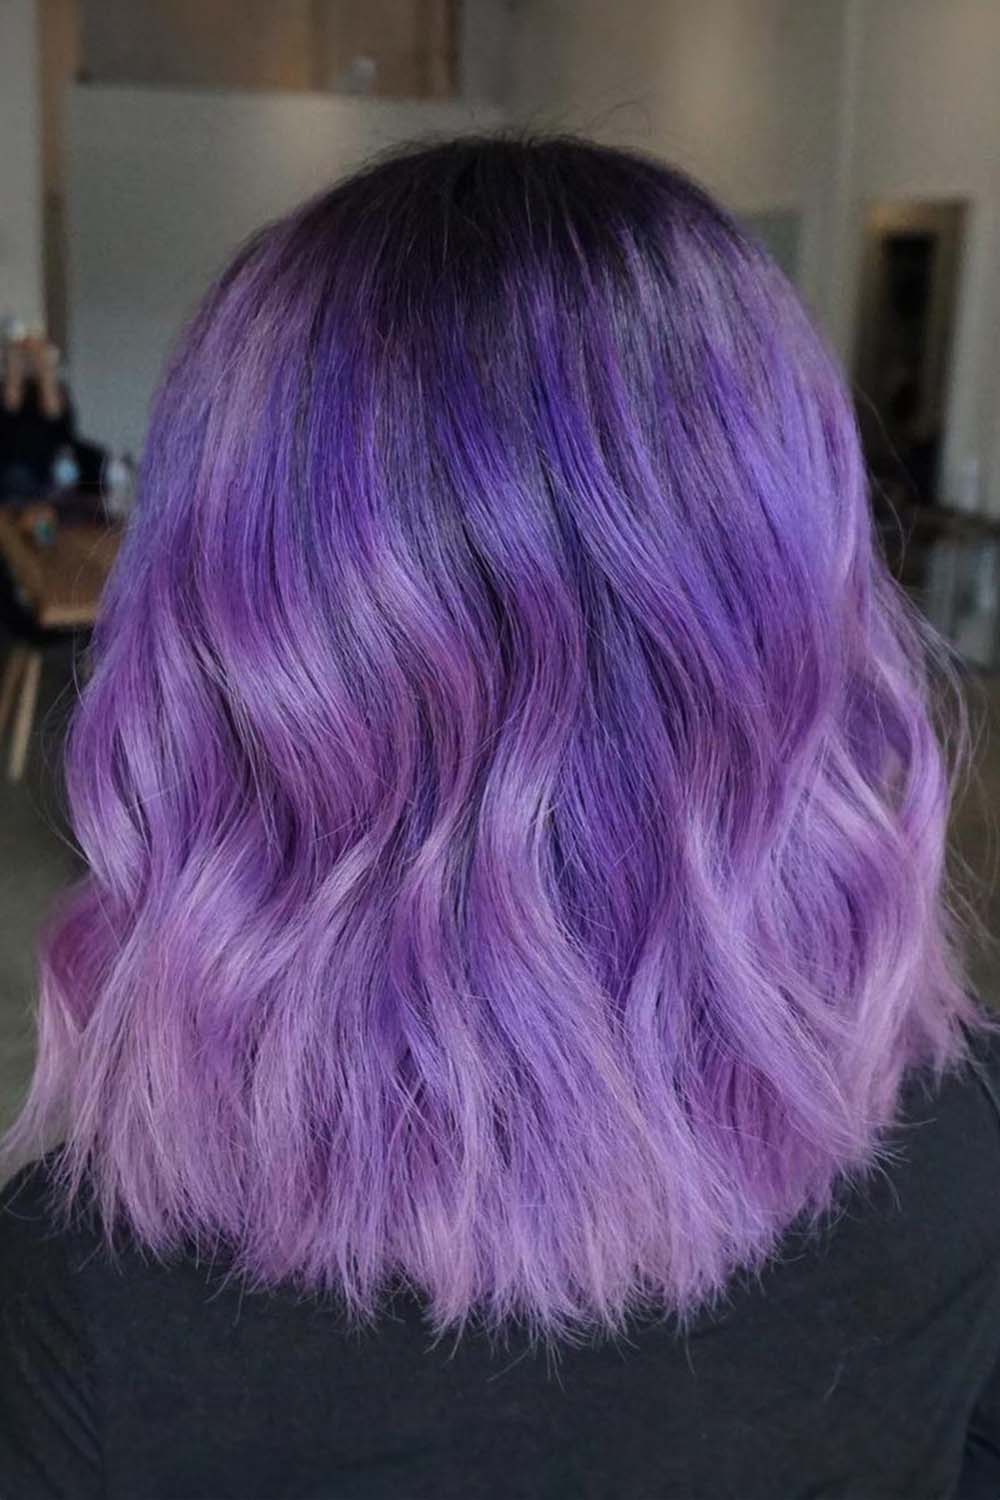 Blue and Lavender Hair Color Mix